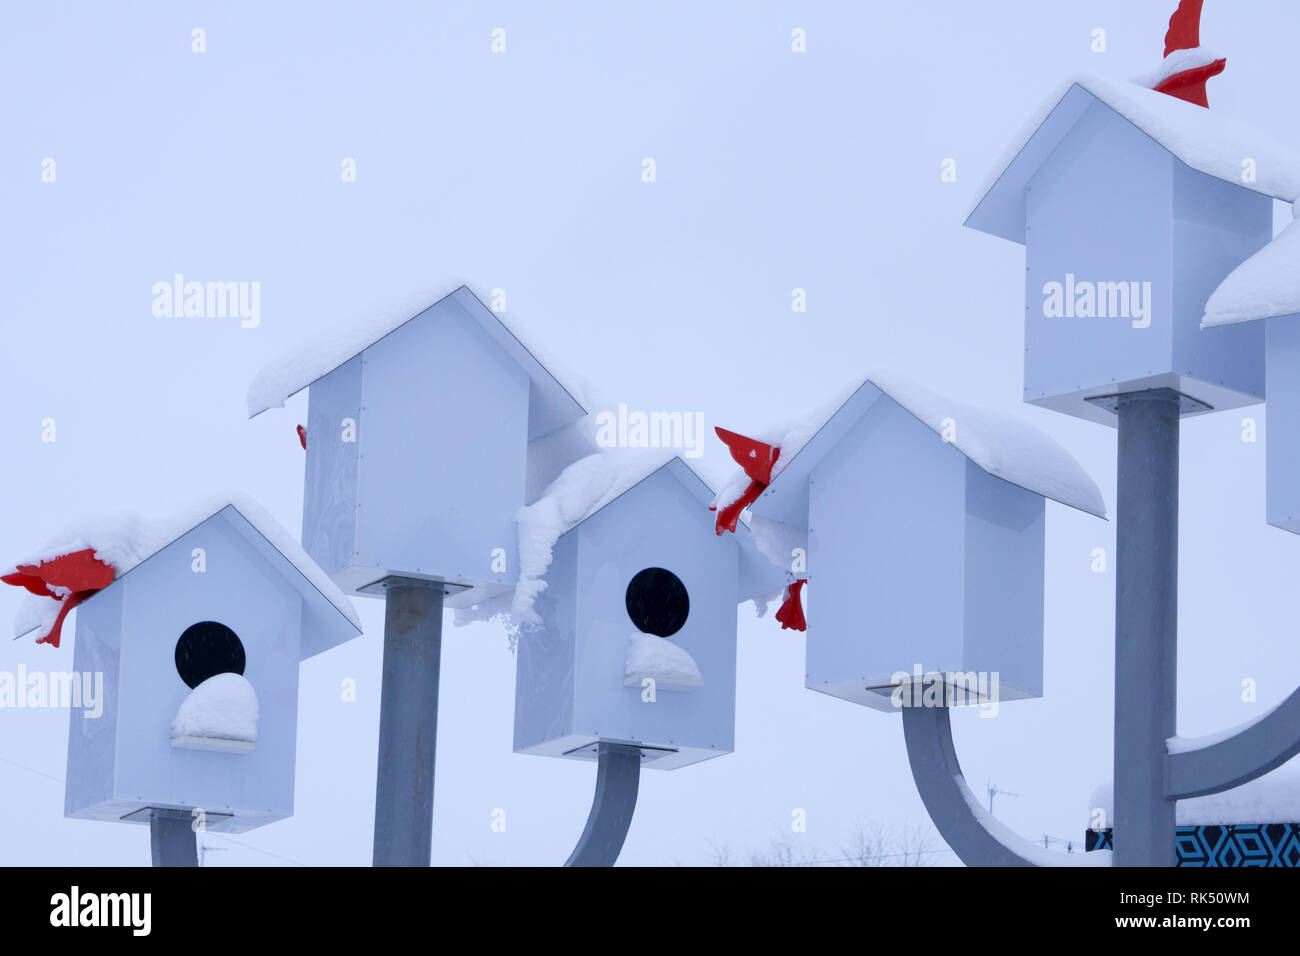 Wooden colorful birdhouses isolated on a white background. Life in the neighborhood. Nesting season. Stock Photo